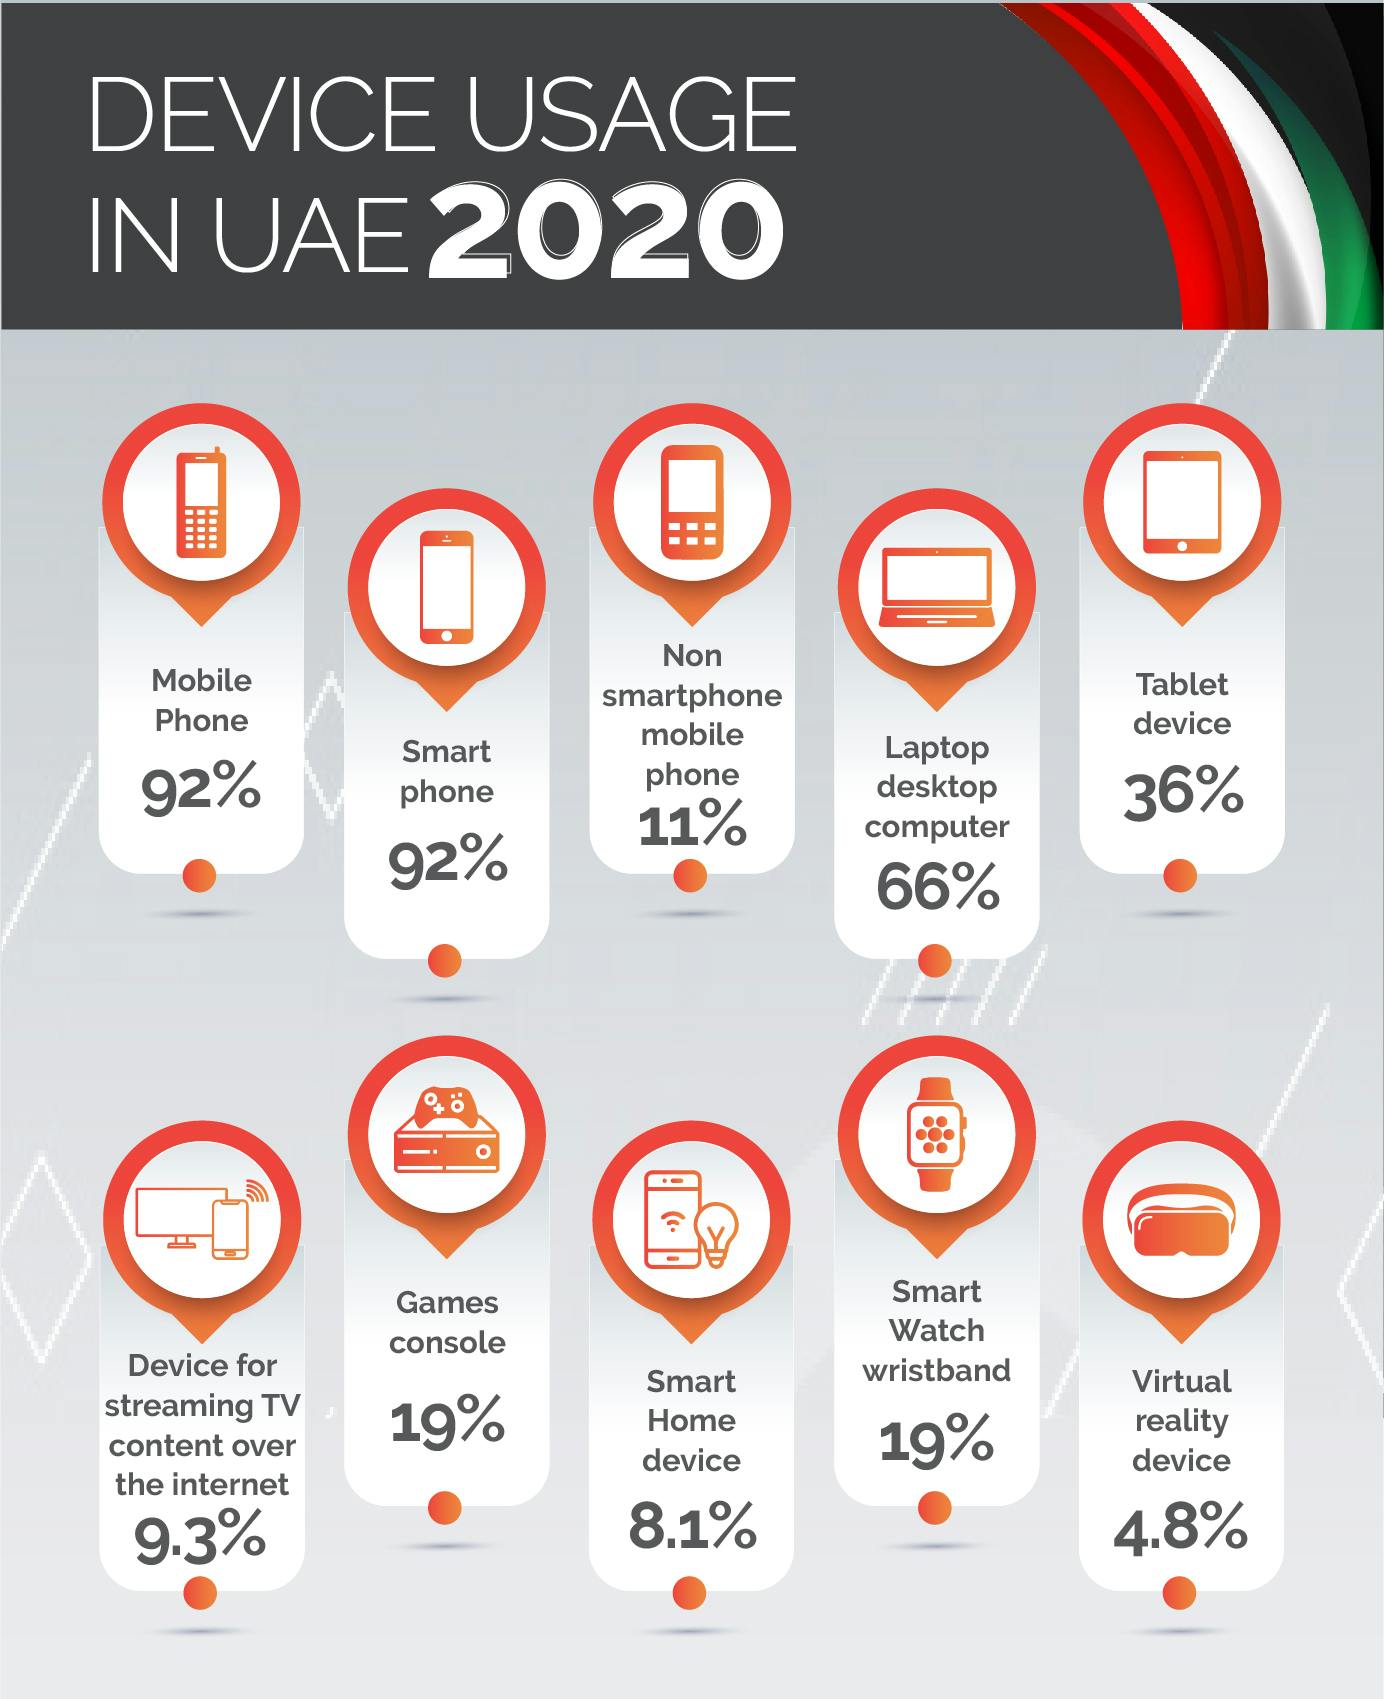 Device usage in UAE 2020